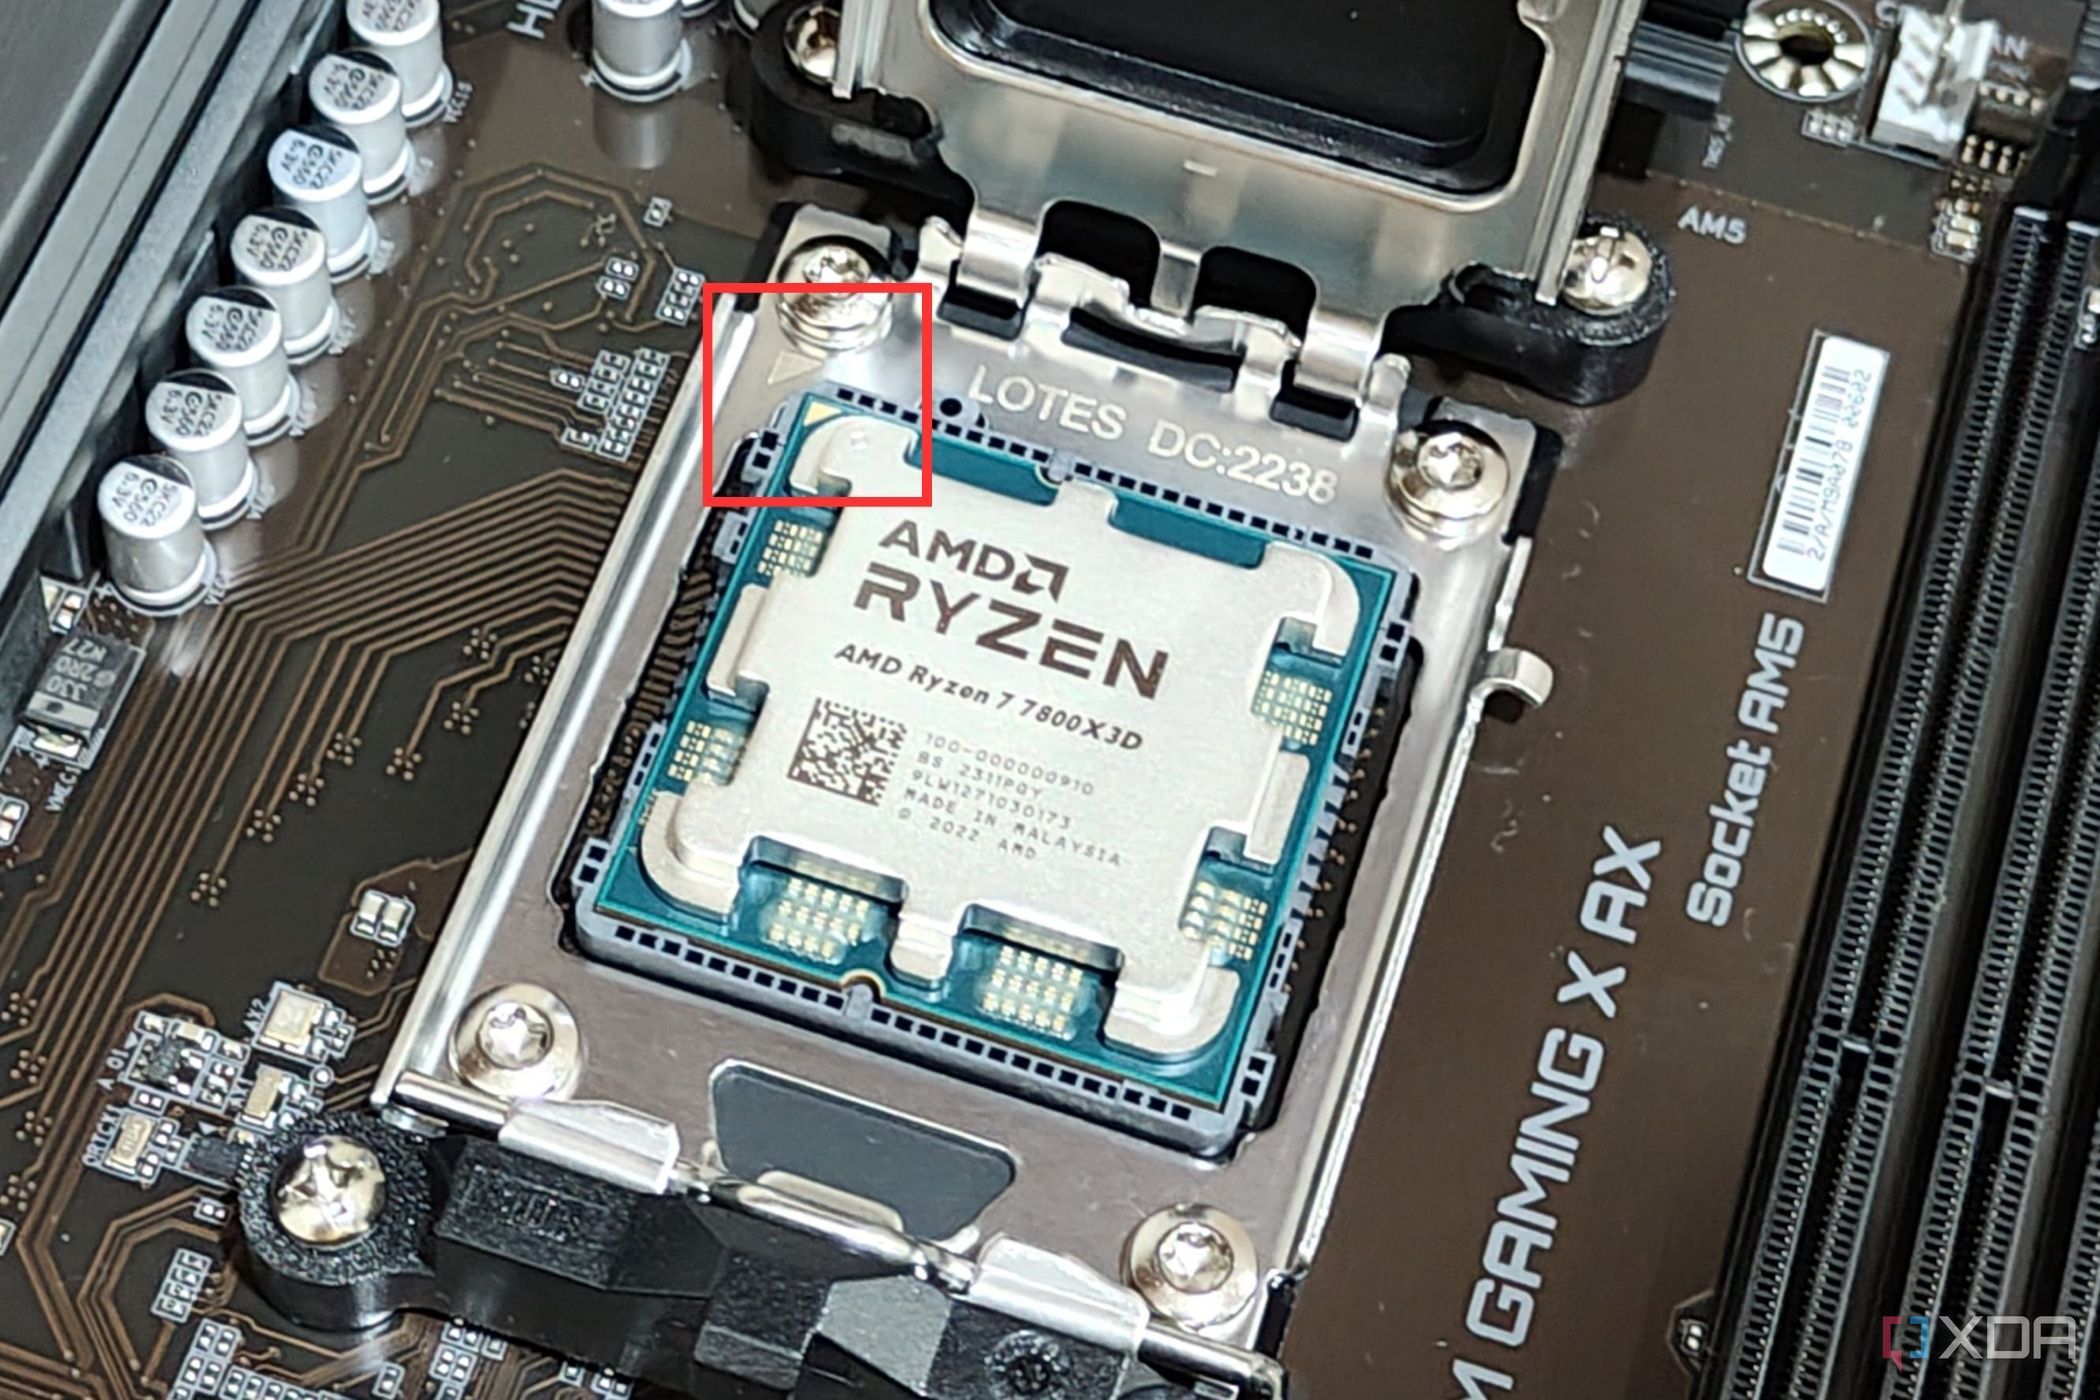 An image showing the highlighted triangle indicator on the motherboard socket and the CPU.